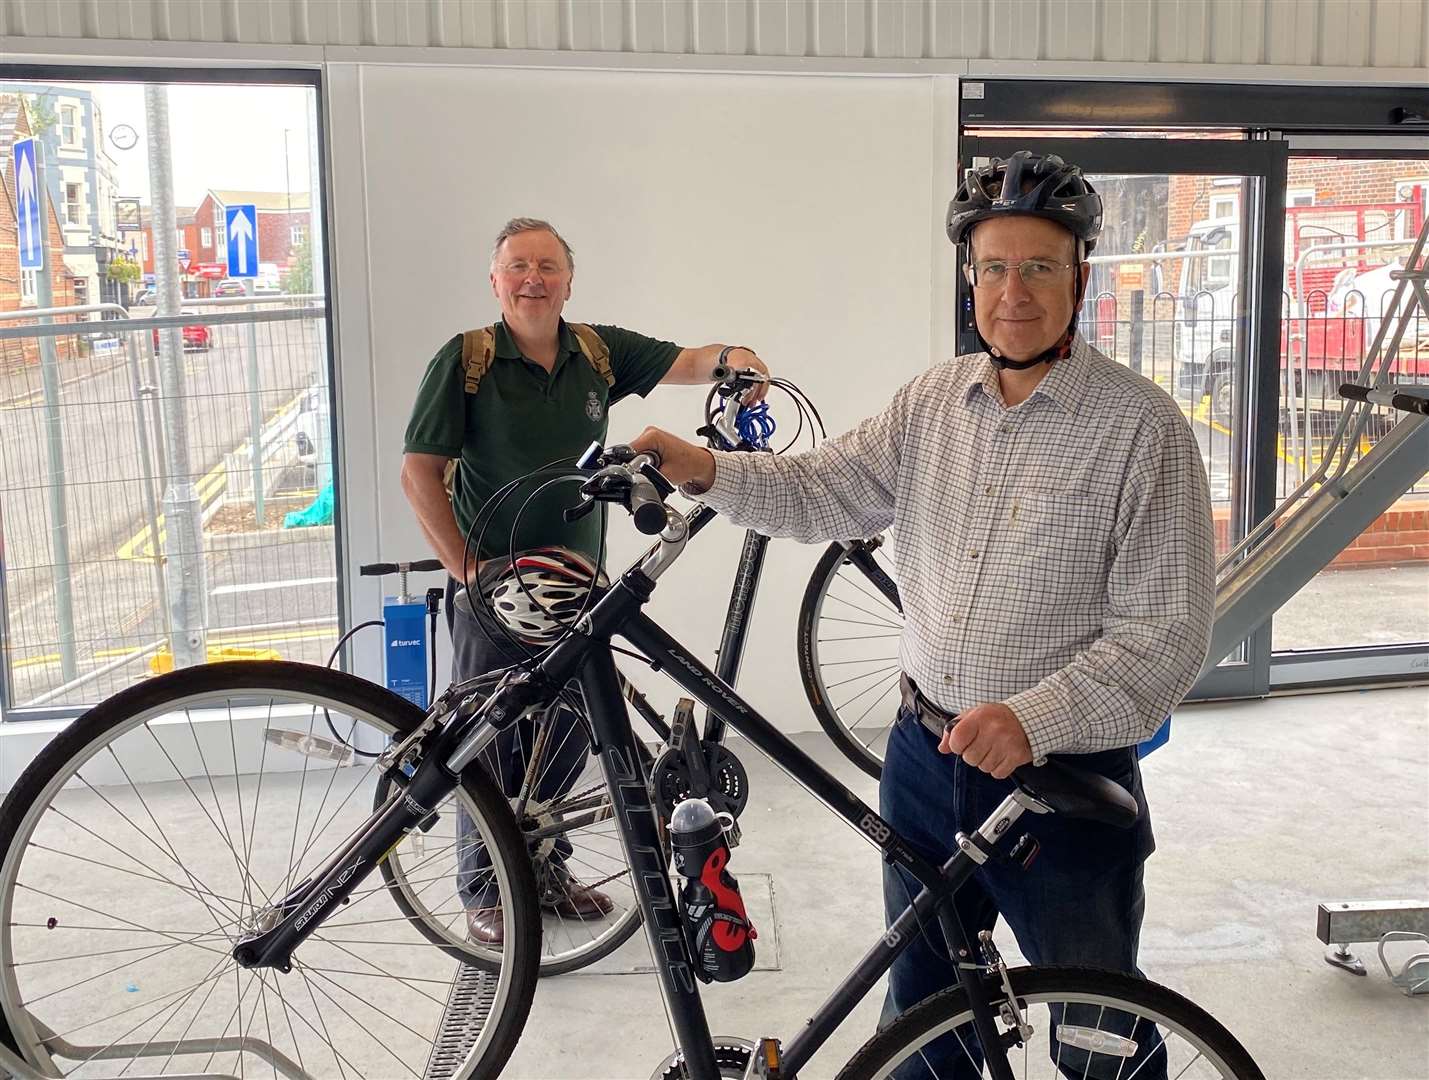 Tonbridge councillors Michael Payne and Richard Long visit the cycle hub which is near completion